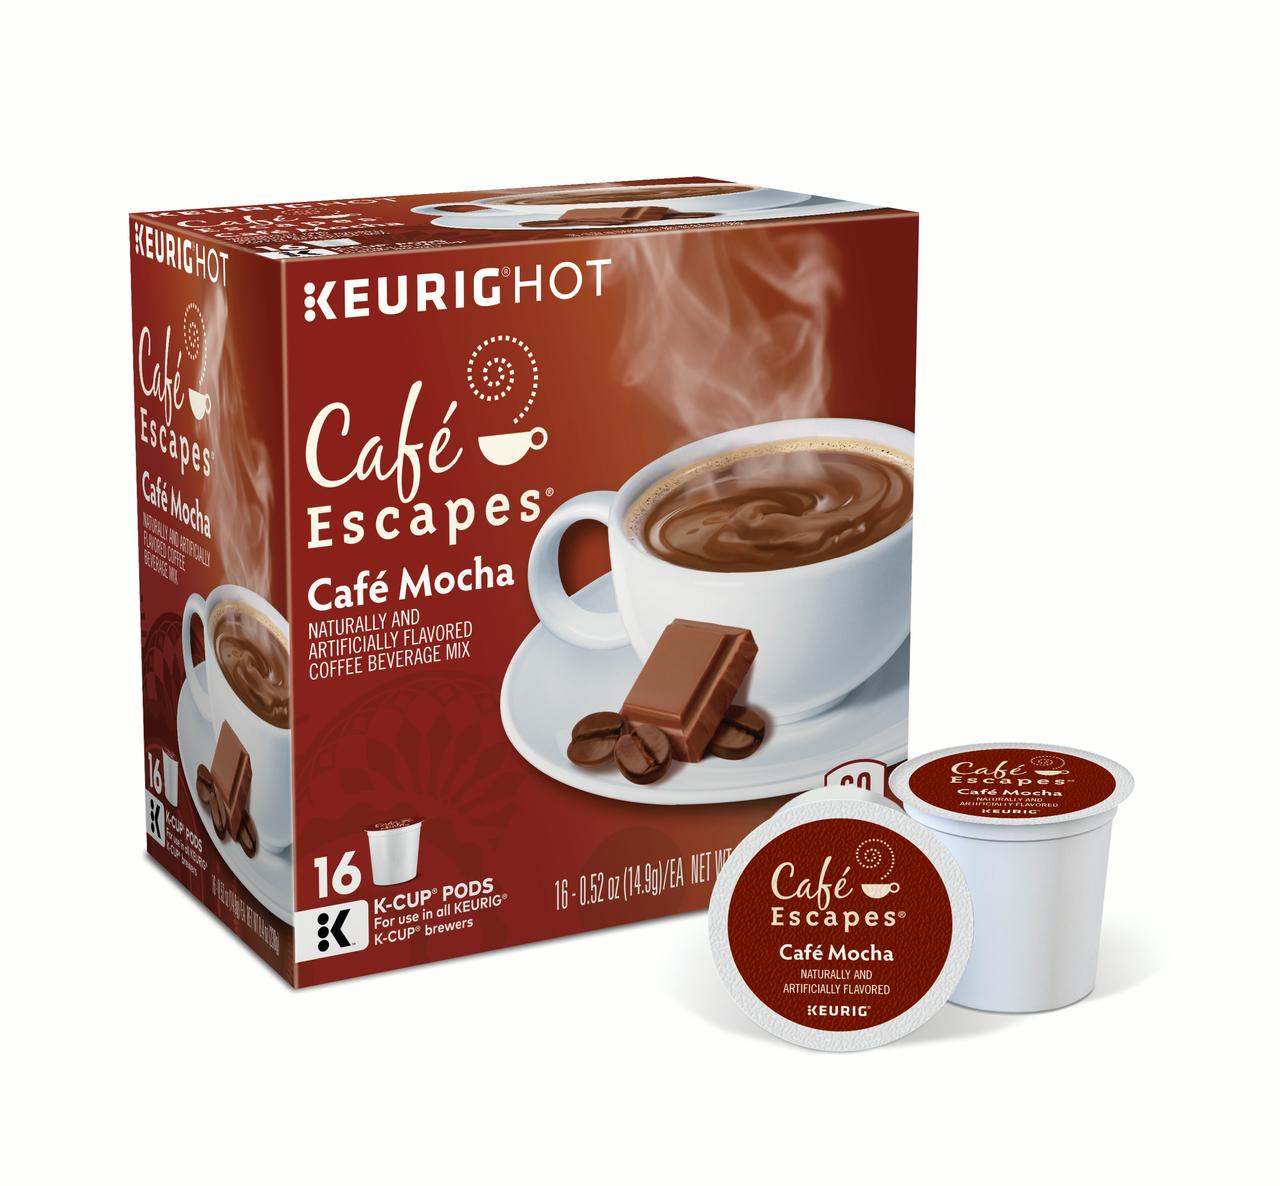 Cafe Escapes Cafe Mocha K-Cup Pods, 16 Count for Keurig Brewers - image 3 of 6